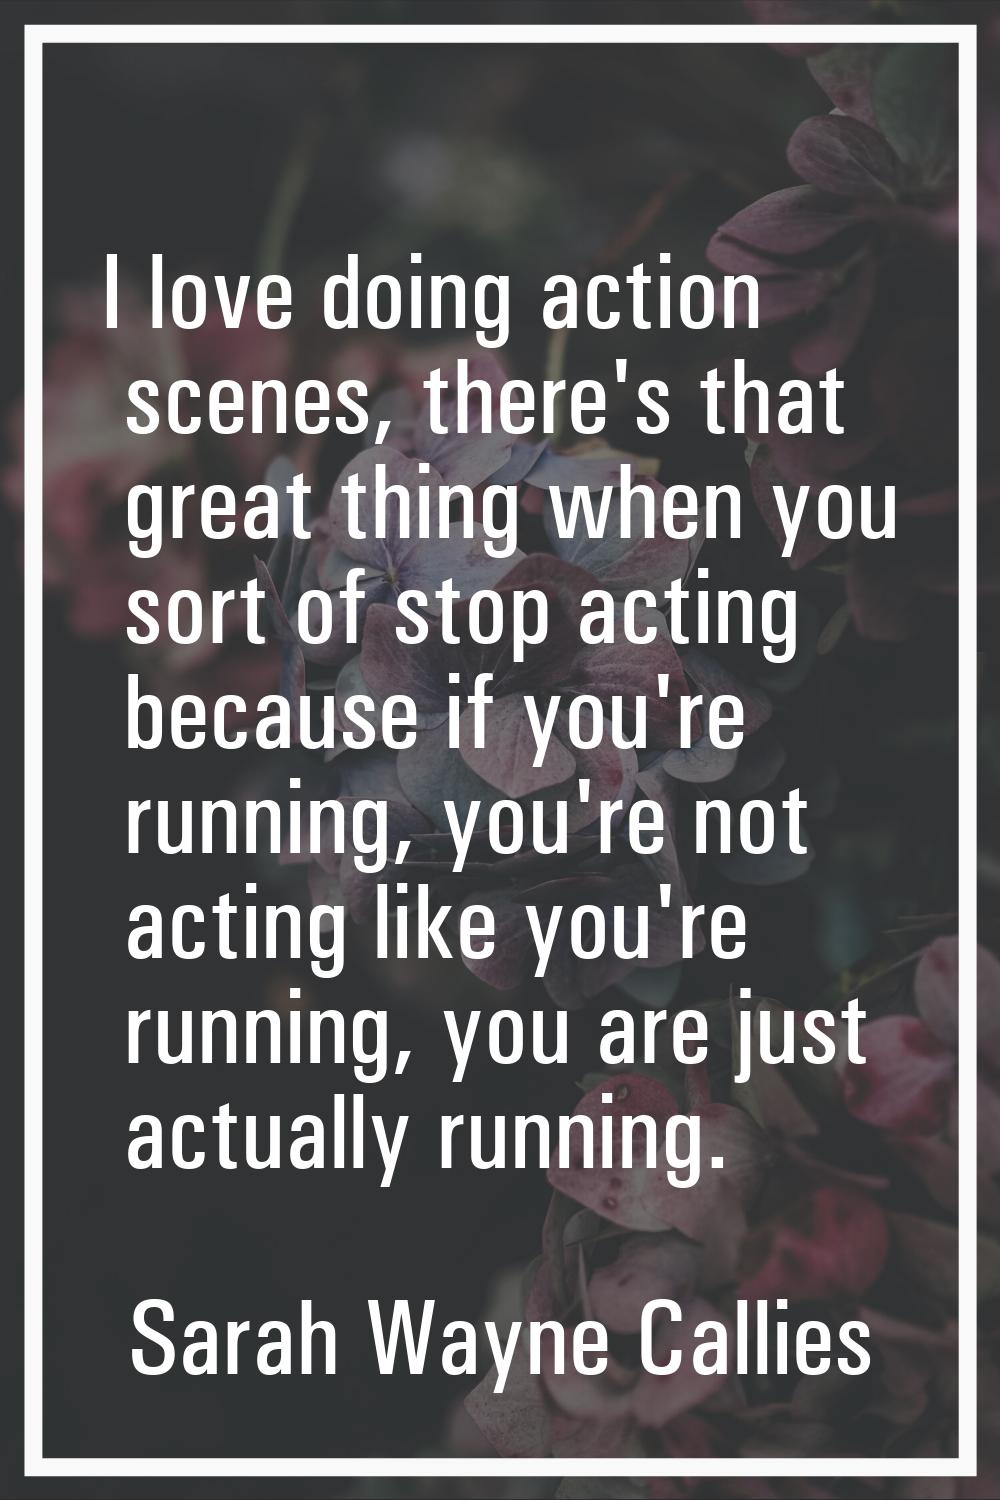 I love doing action scenes, there's that great thing when you sort of stop acting because if you're